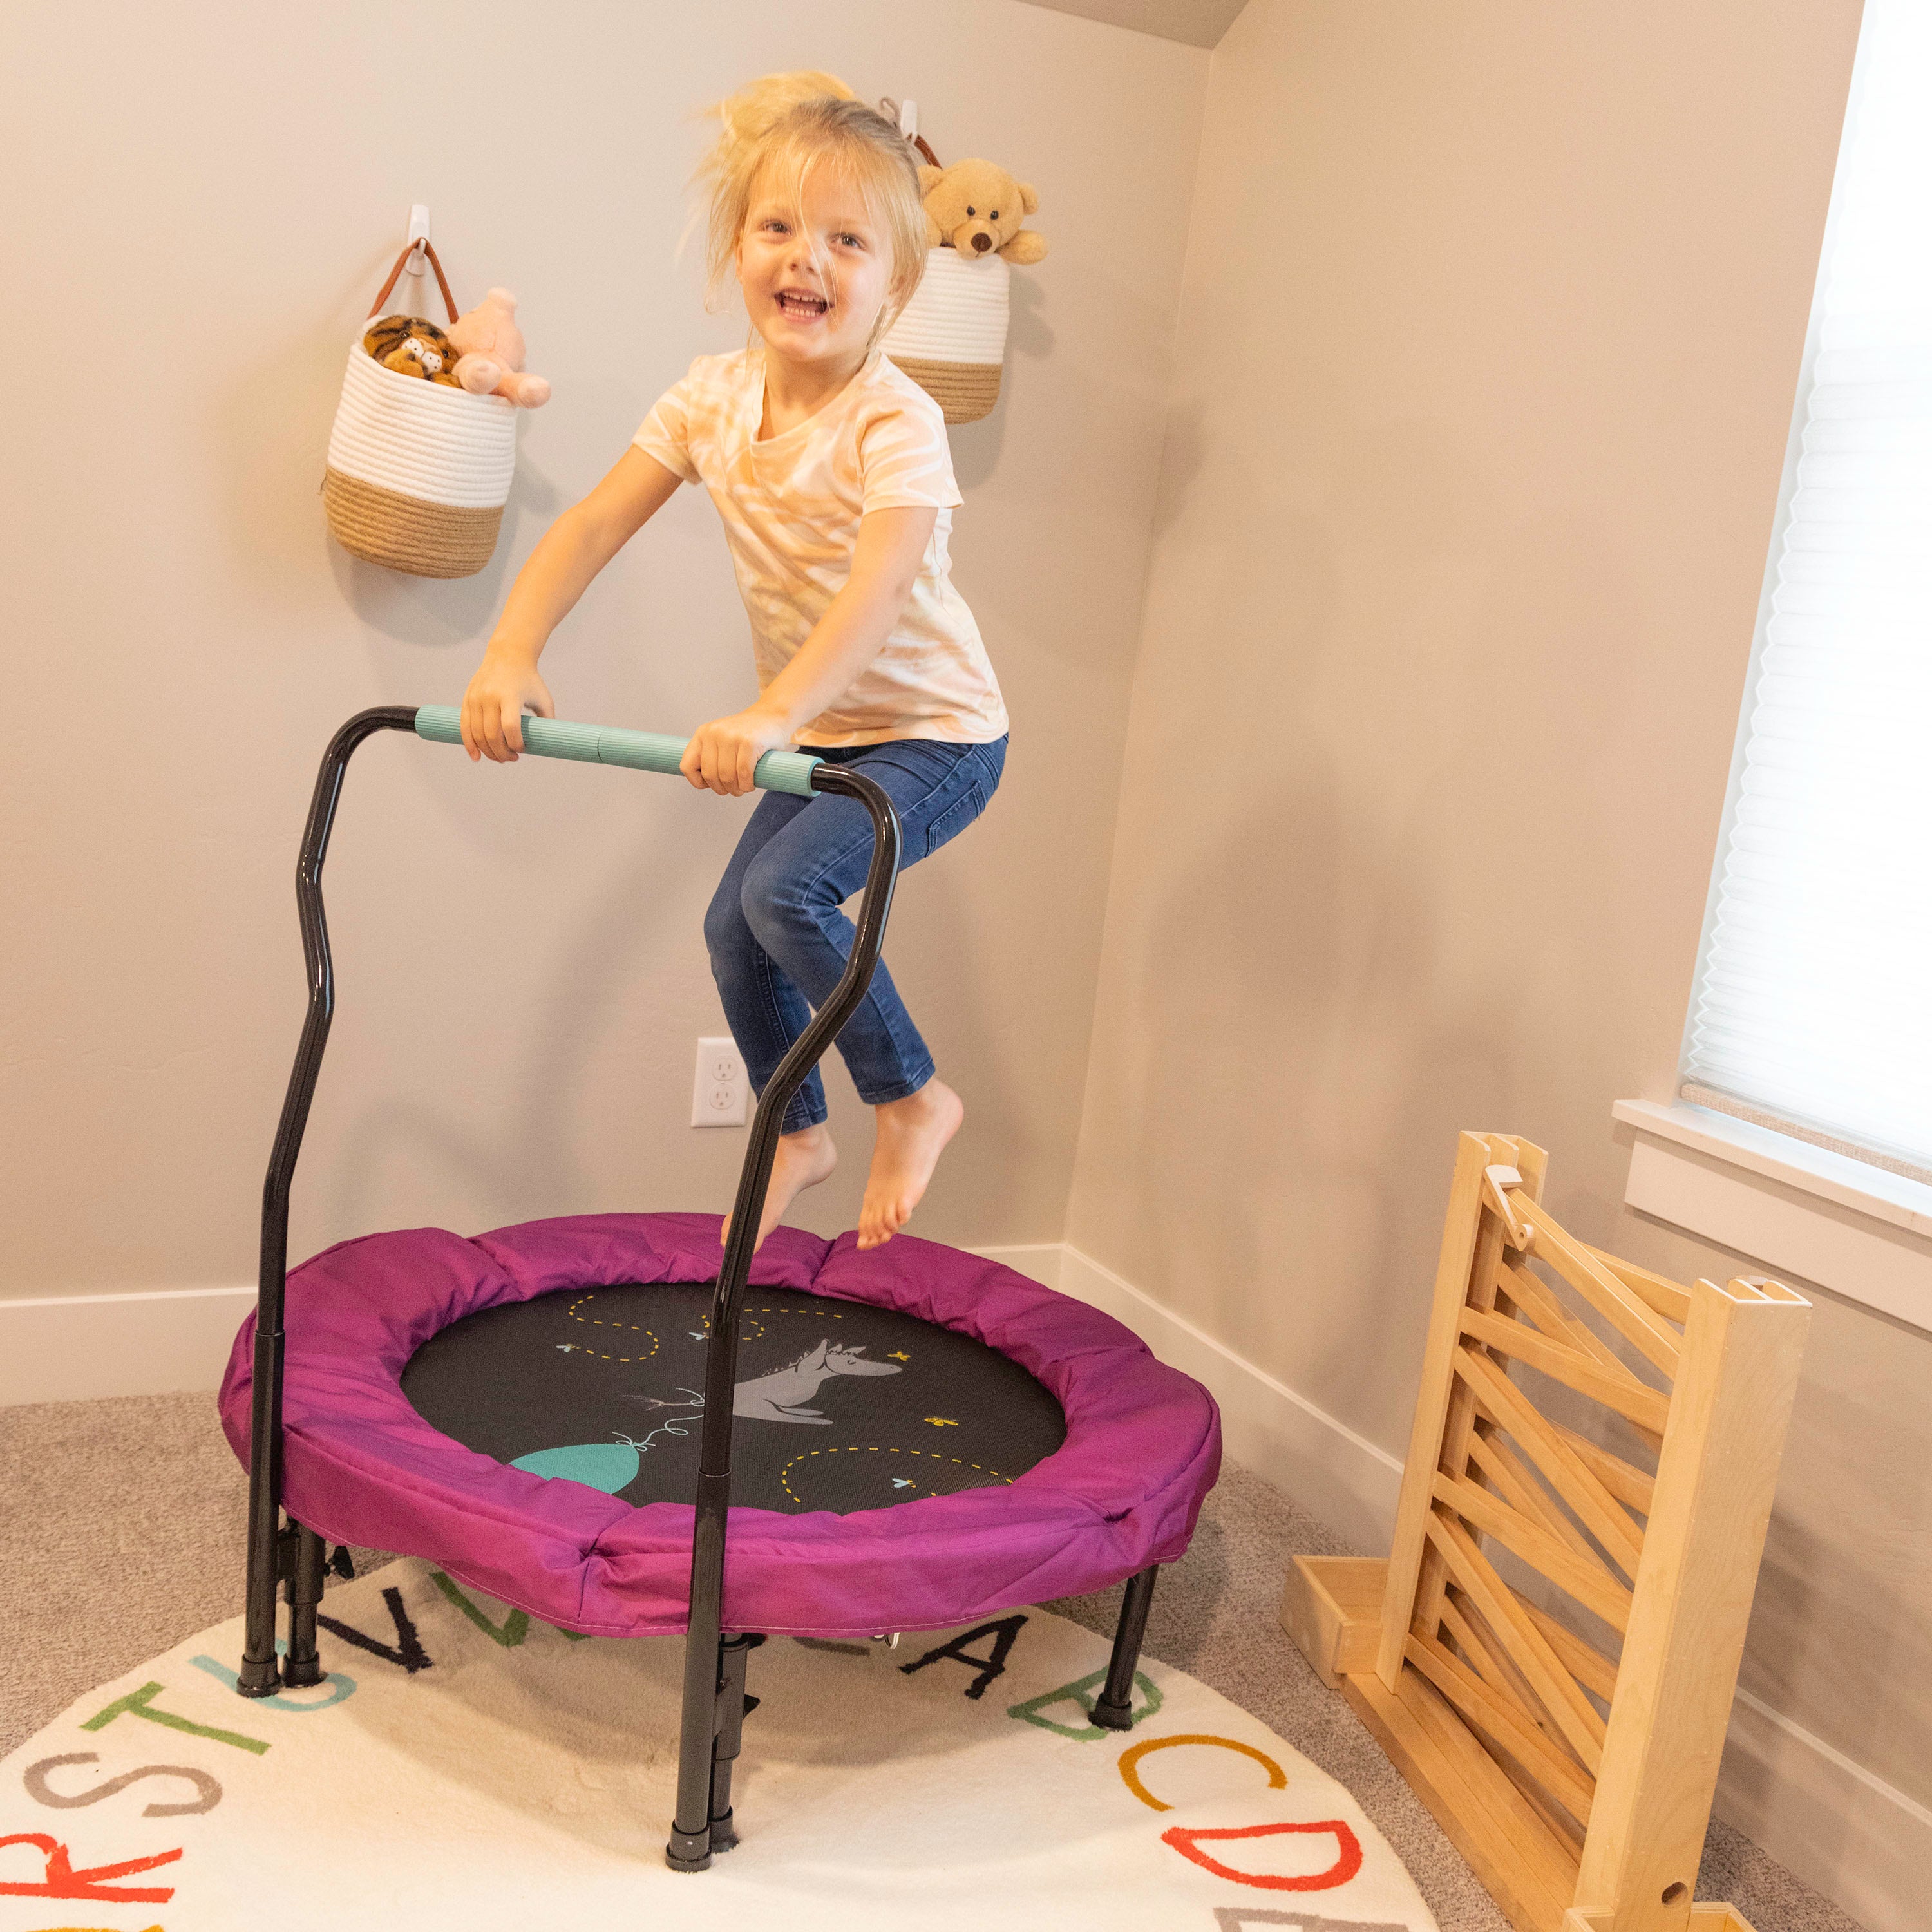 The 36” Eeyore toddler trampoline sits in the corner of a room while a young girl jumps on it. 